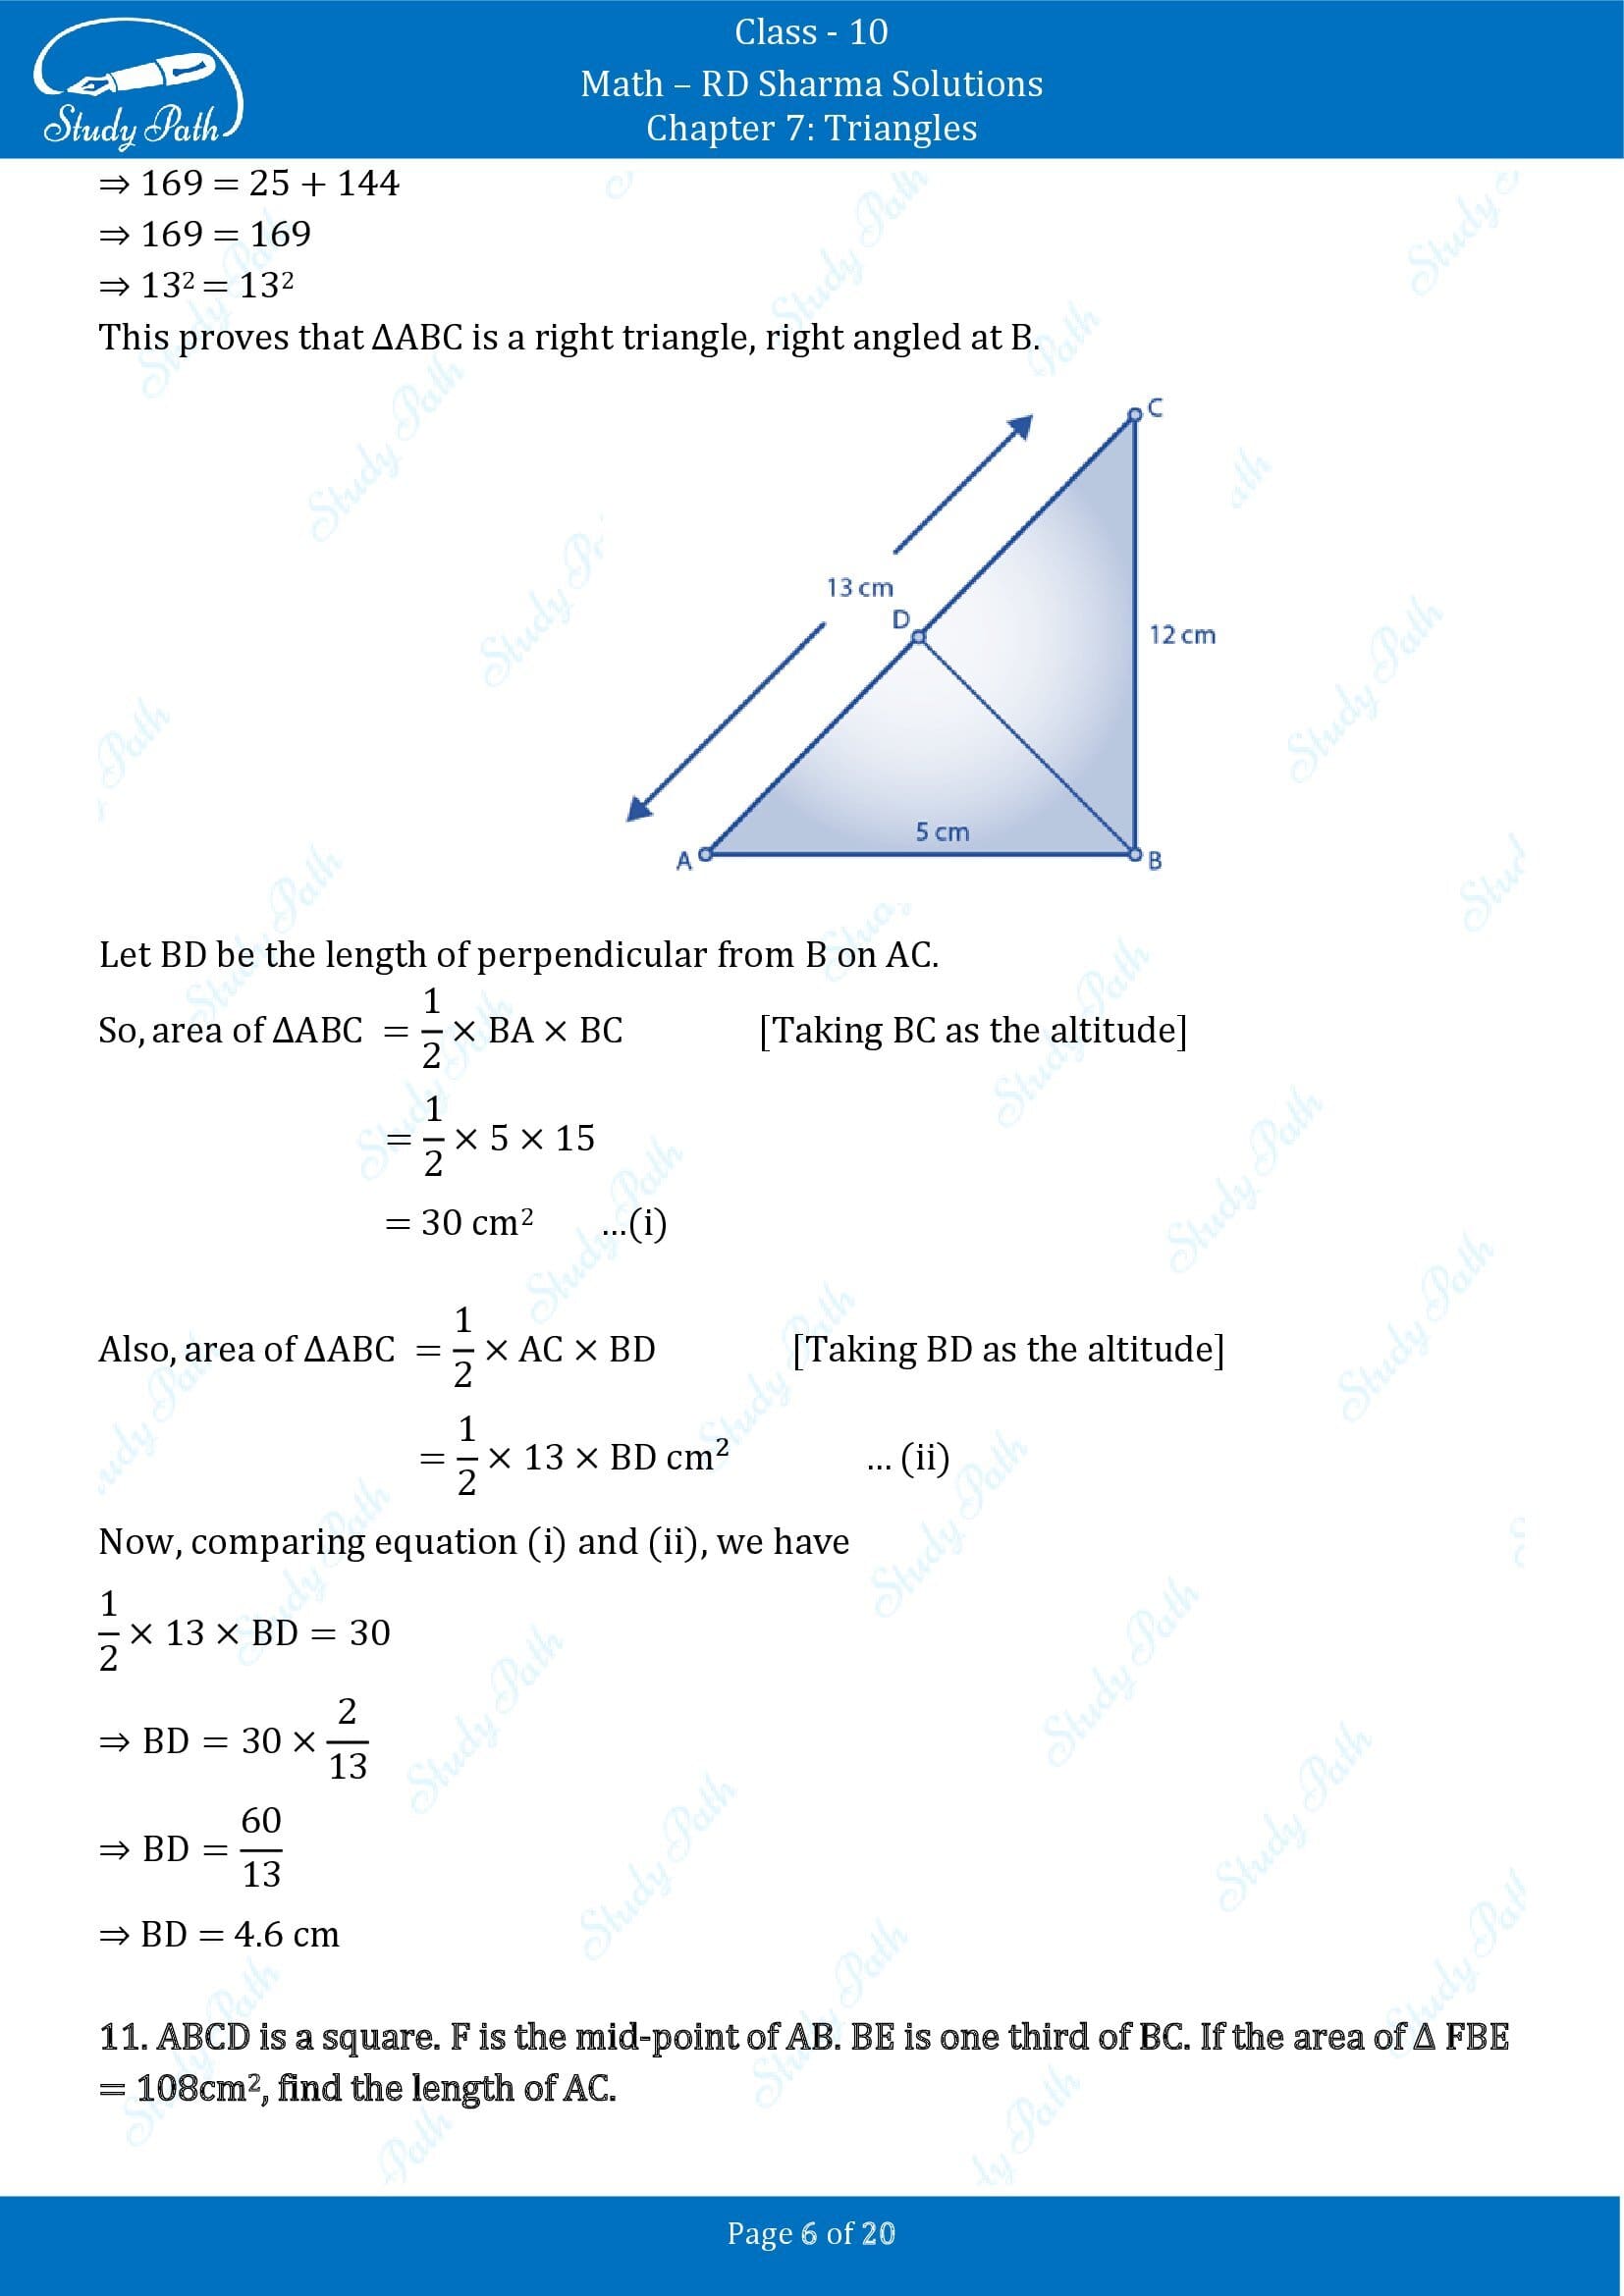 RD Sharma Solutions Class 10 Chapter 7 Triangles Exercise 7.7 00006